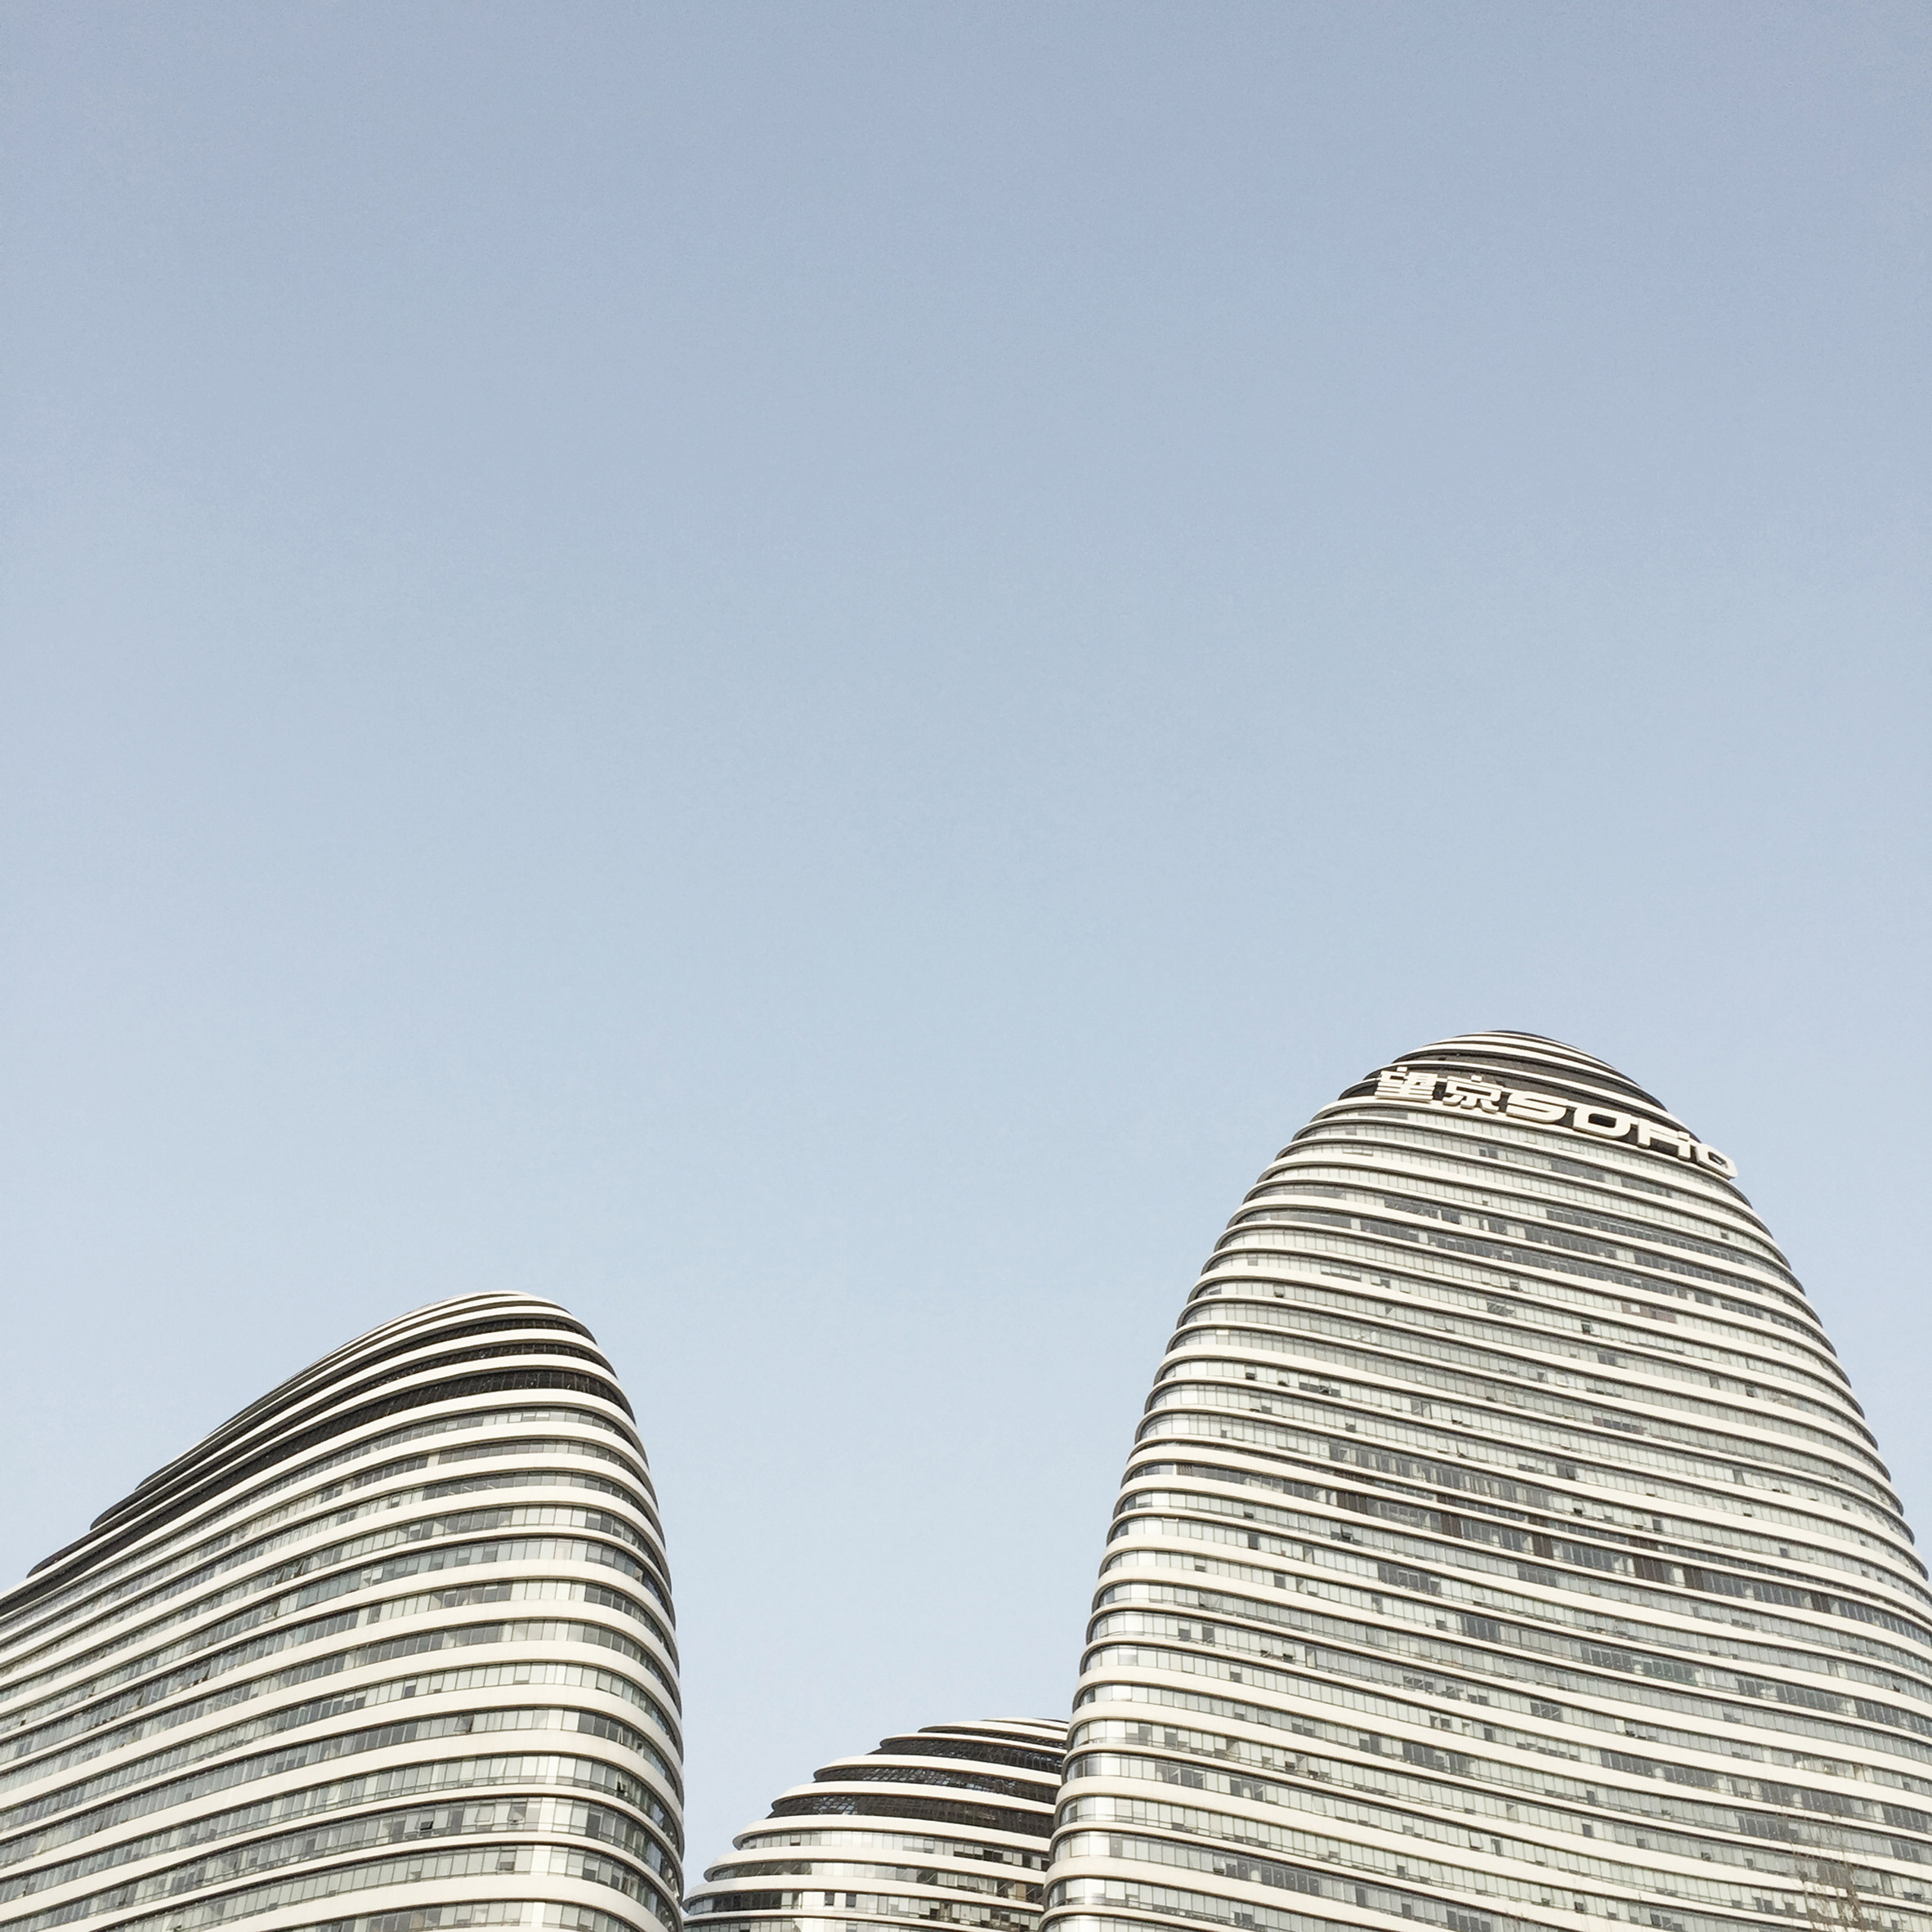 Beautified China by Kris Provoost